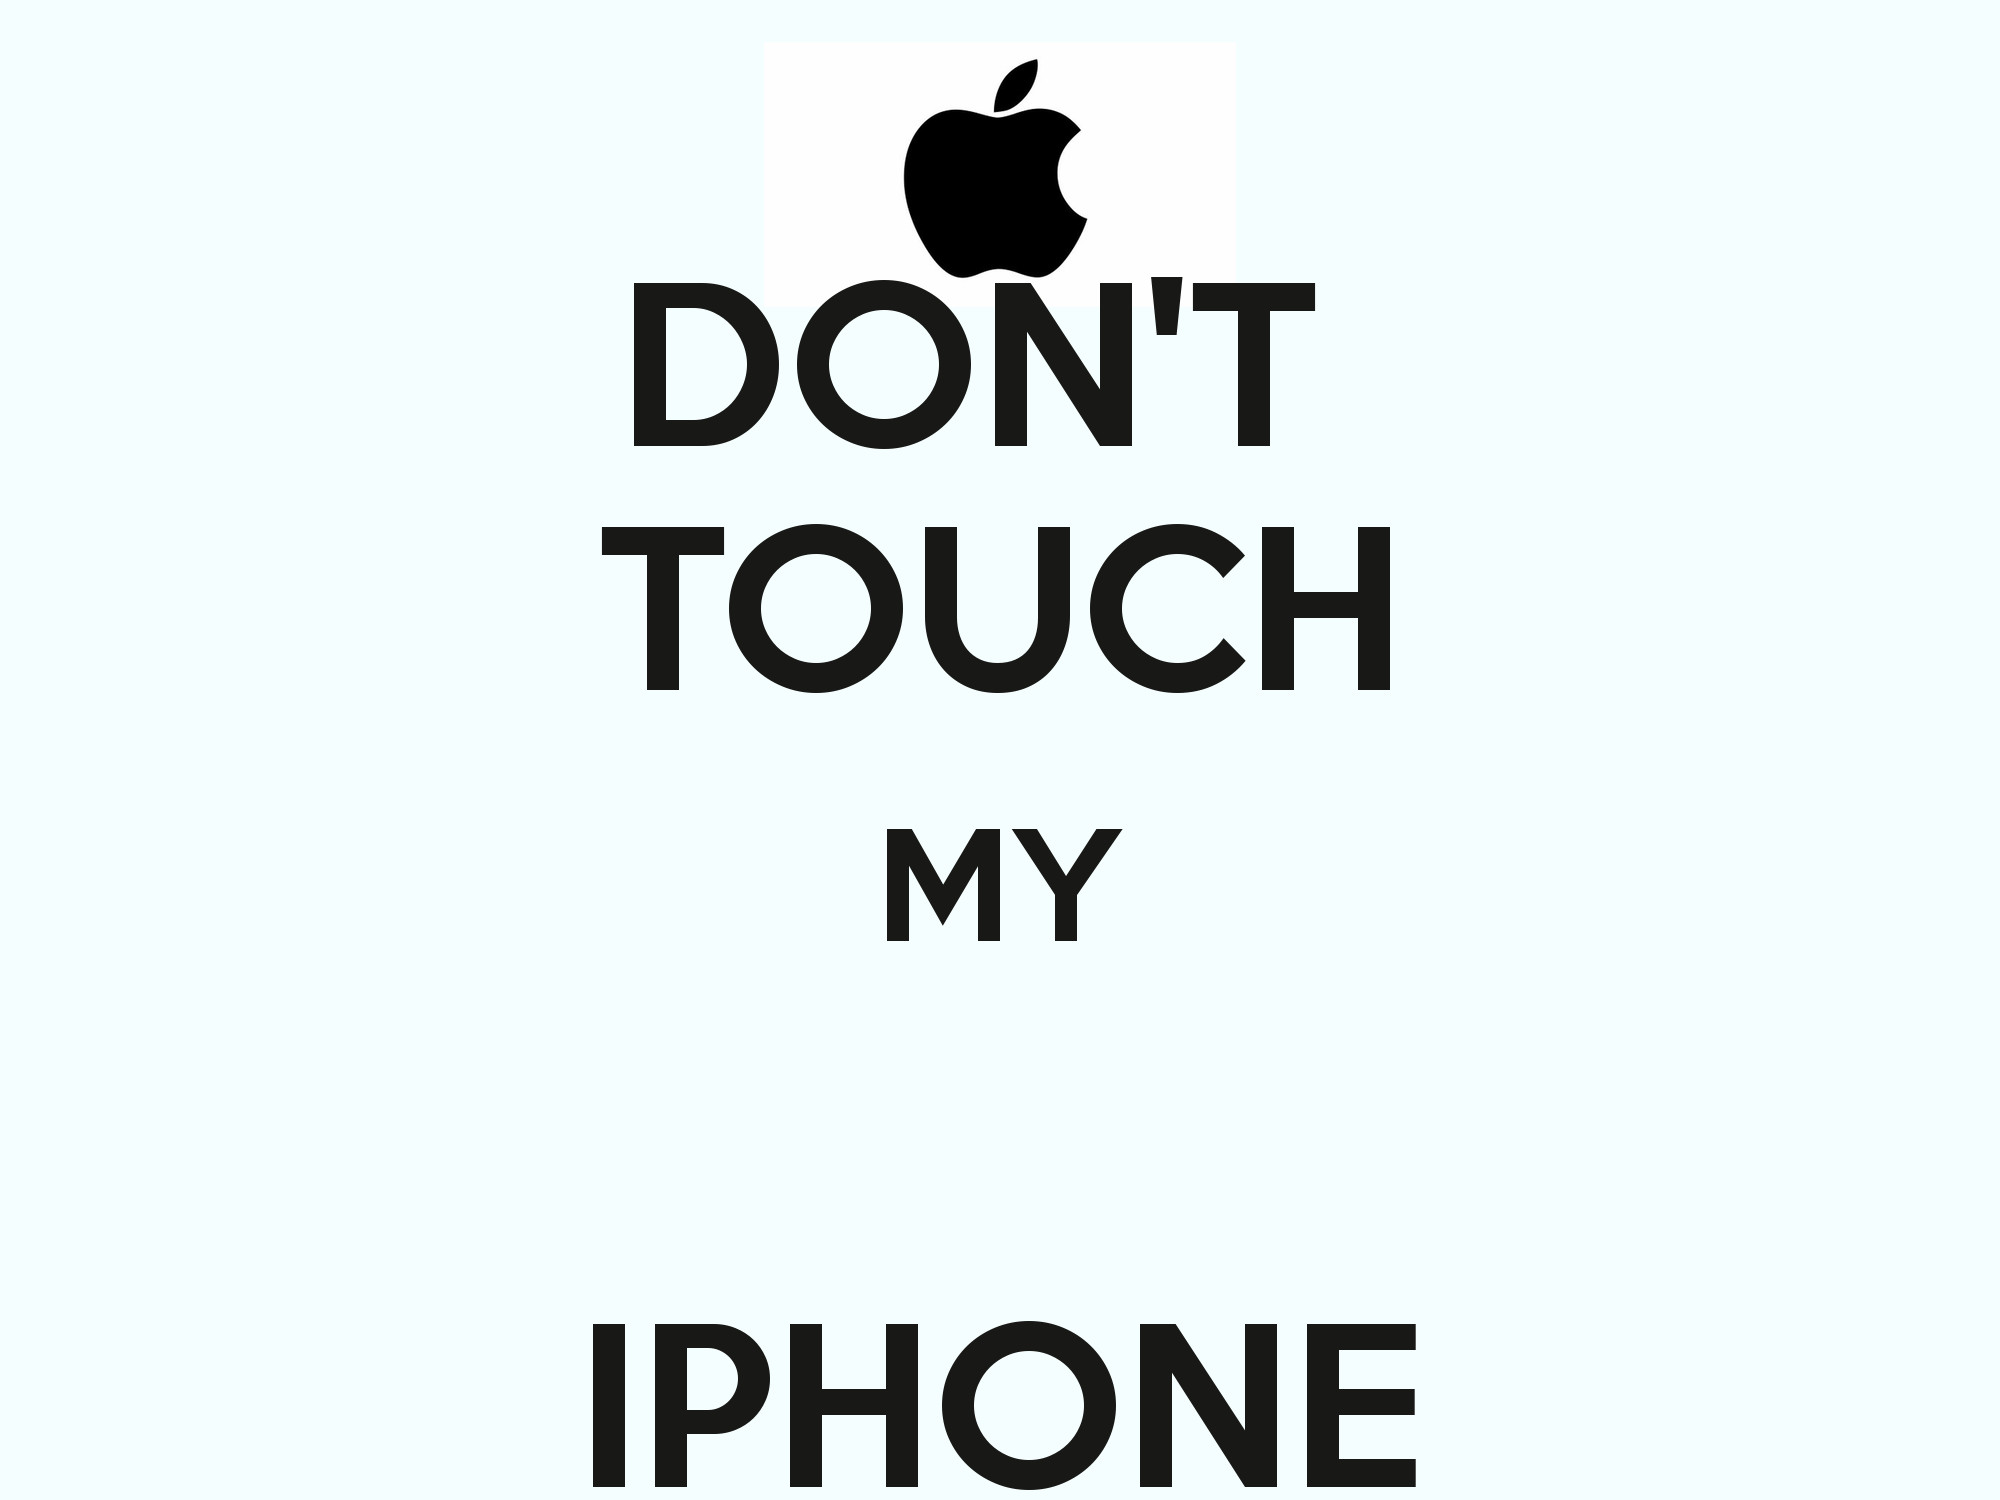 DON'T TOUCH MY IPHONE – KEEP CALM AND CARRY ON Image Generator